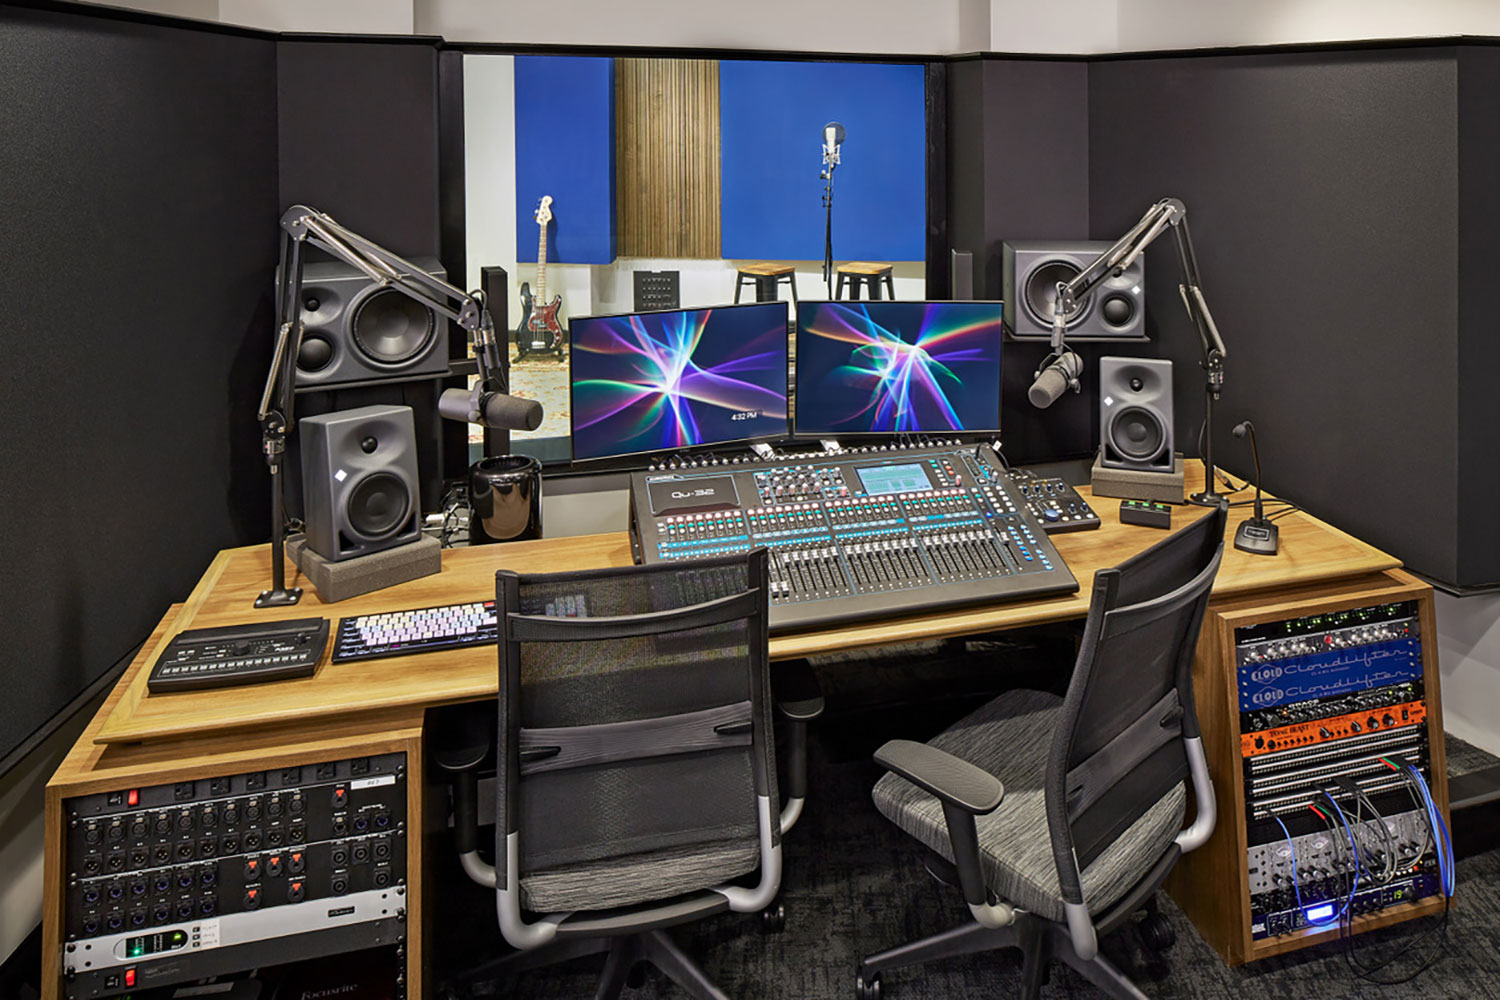 Stitcher is among the earliest, the most creative and most successful podcast creator companies. Their team made a move to build out larger production facilities in both its NY and LA offices and they chose WSDG to design their new podcast studios facilities. Control A.